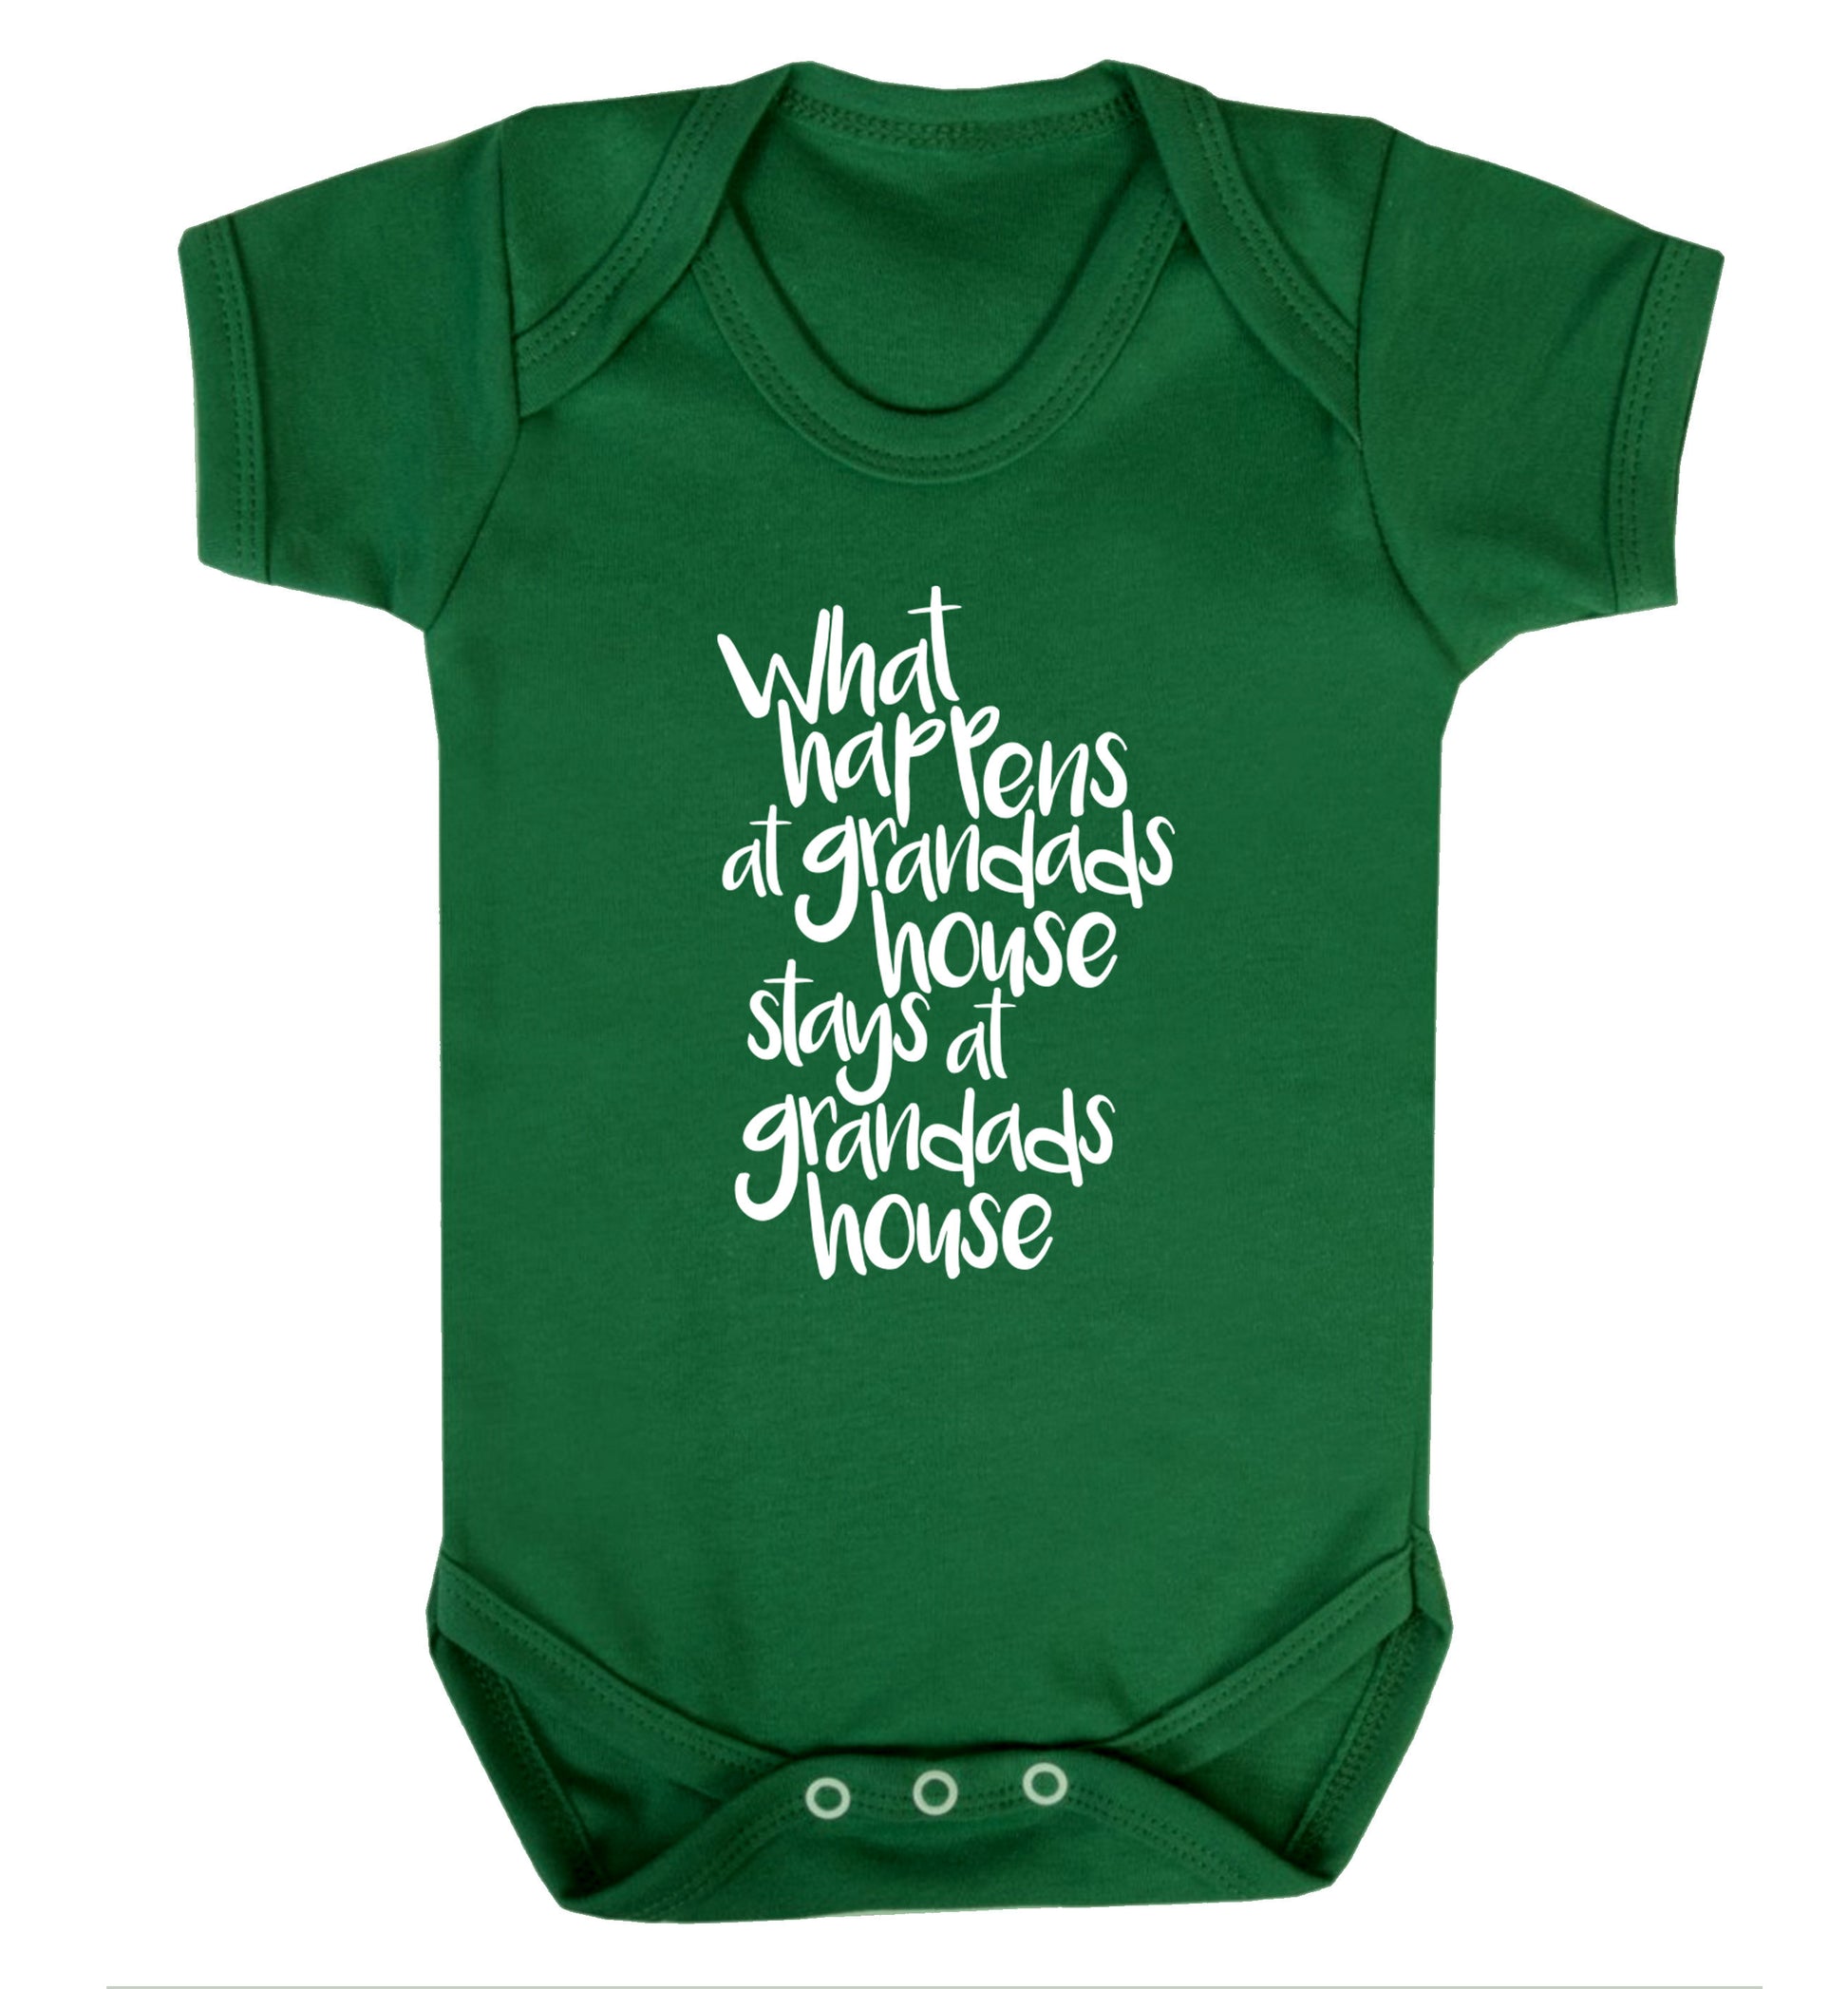 What happens at grandads house stays at grandads house Baby Vest green 18-24 months